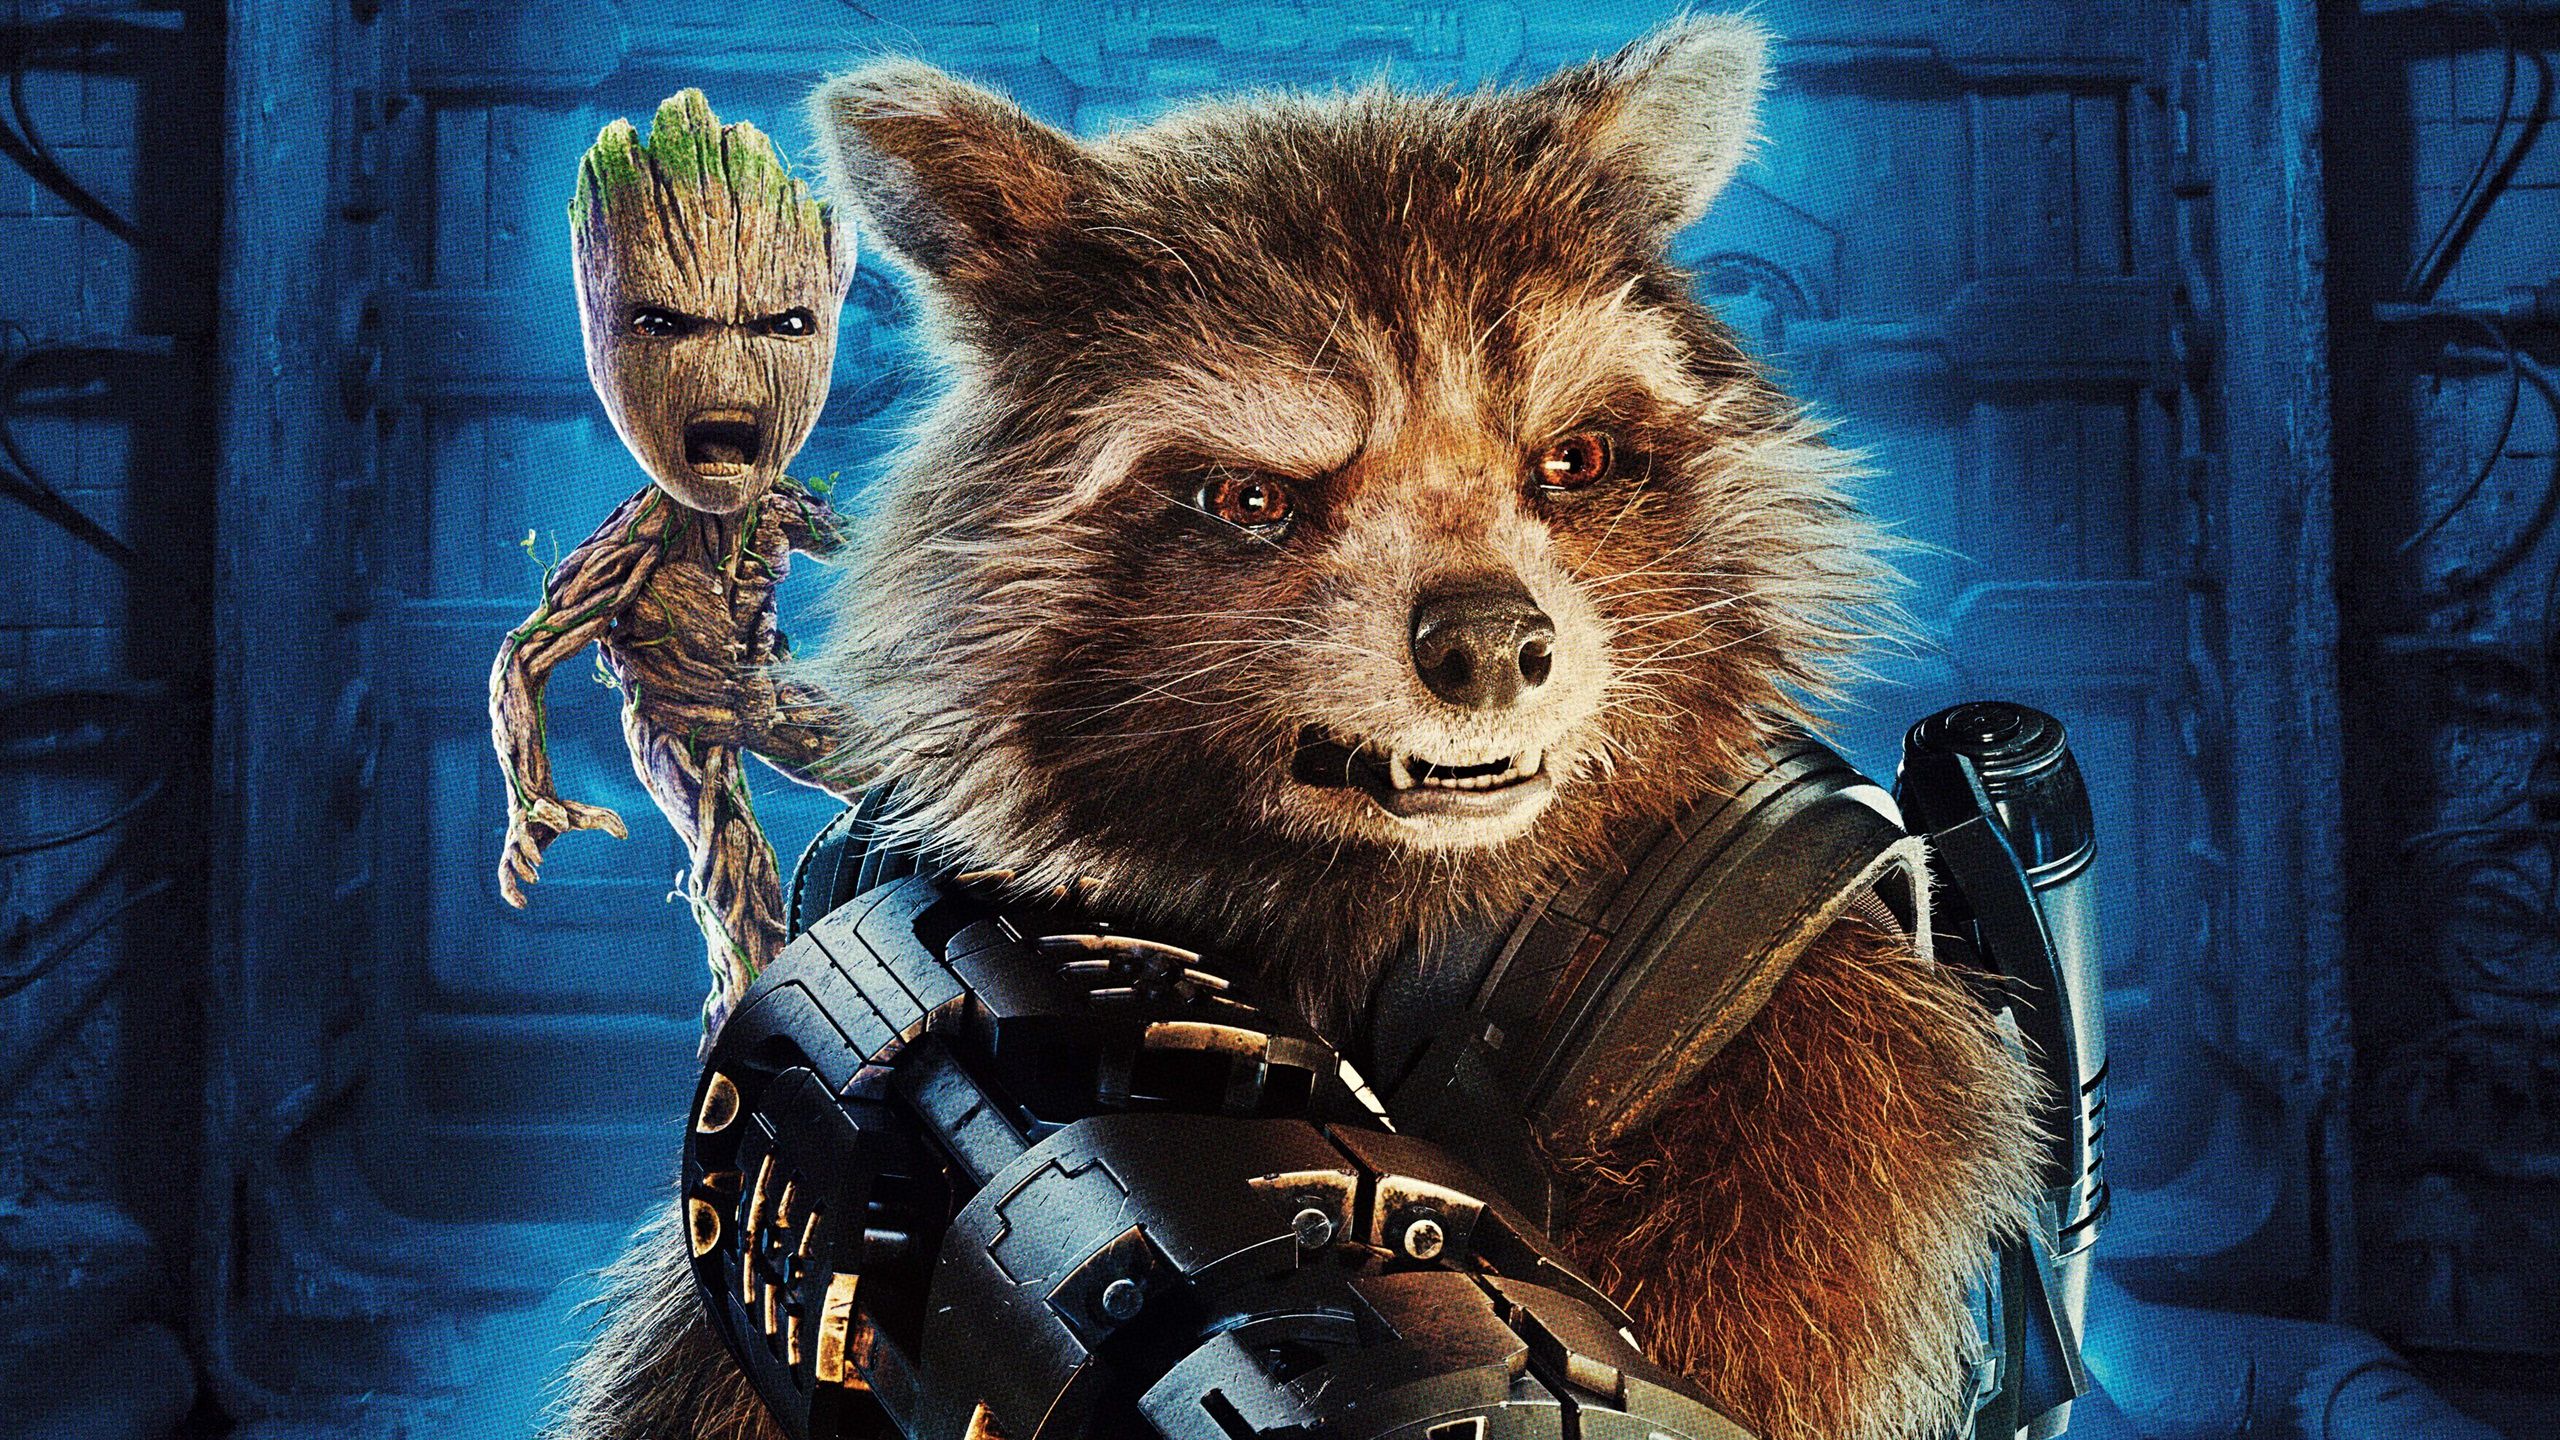 Wallpaper Rocket, Baby Groot, Guardians of the Galaxy 2 3840x2160 UHD 4K Picture, Image